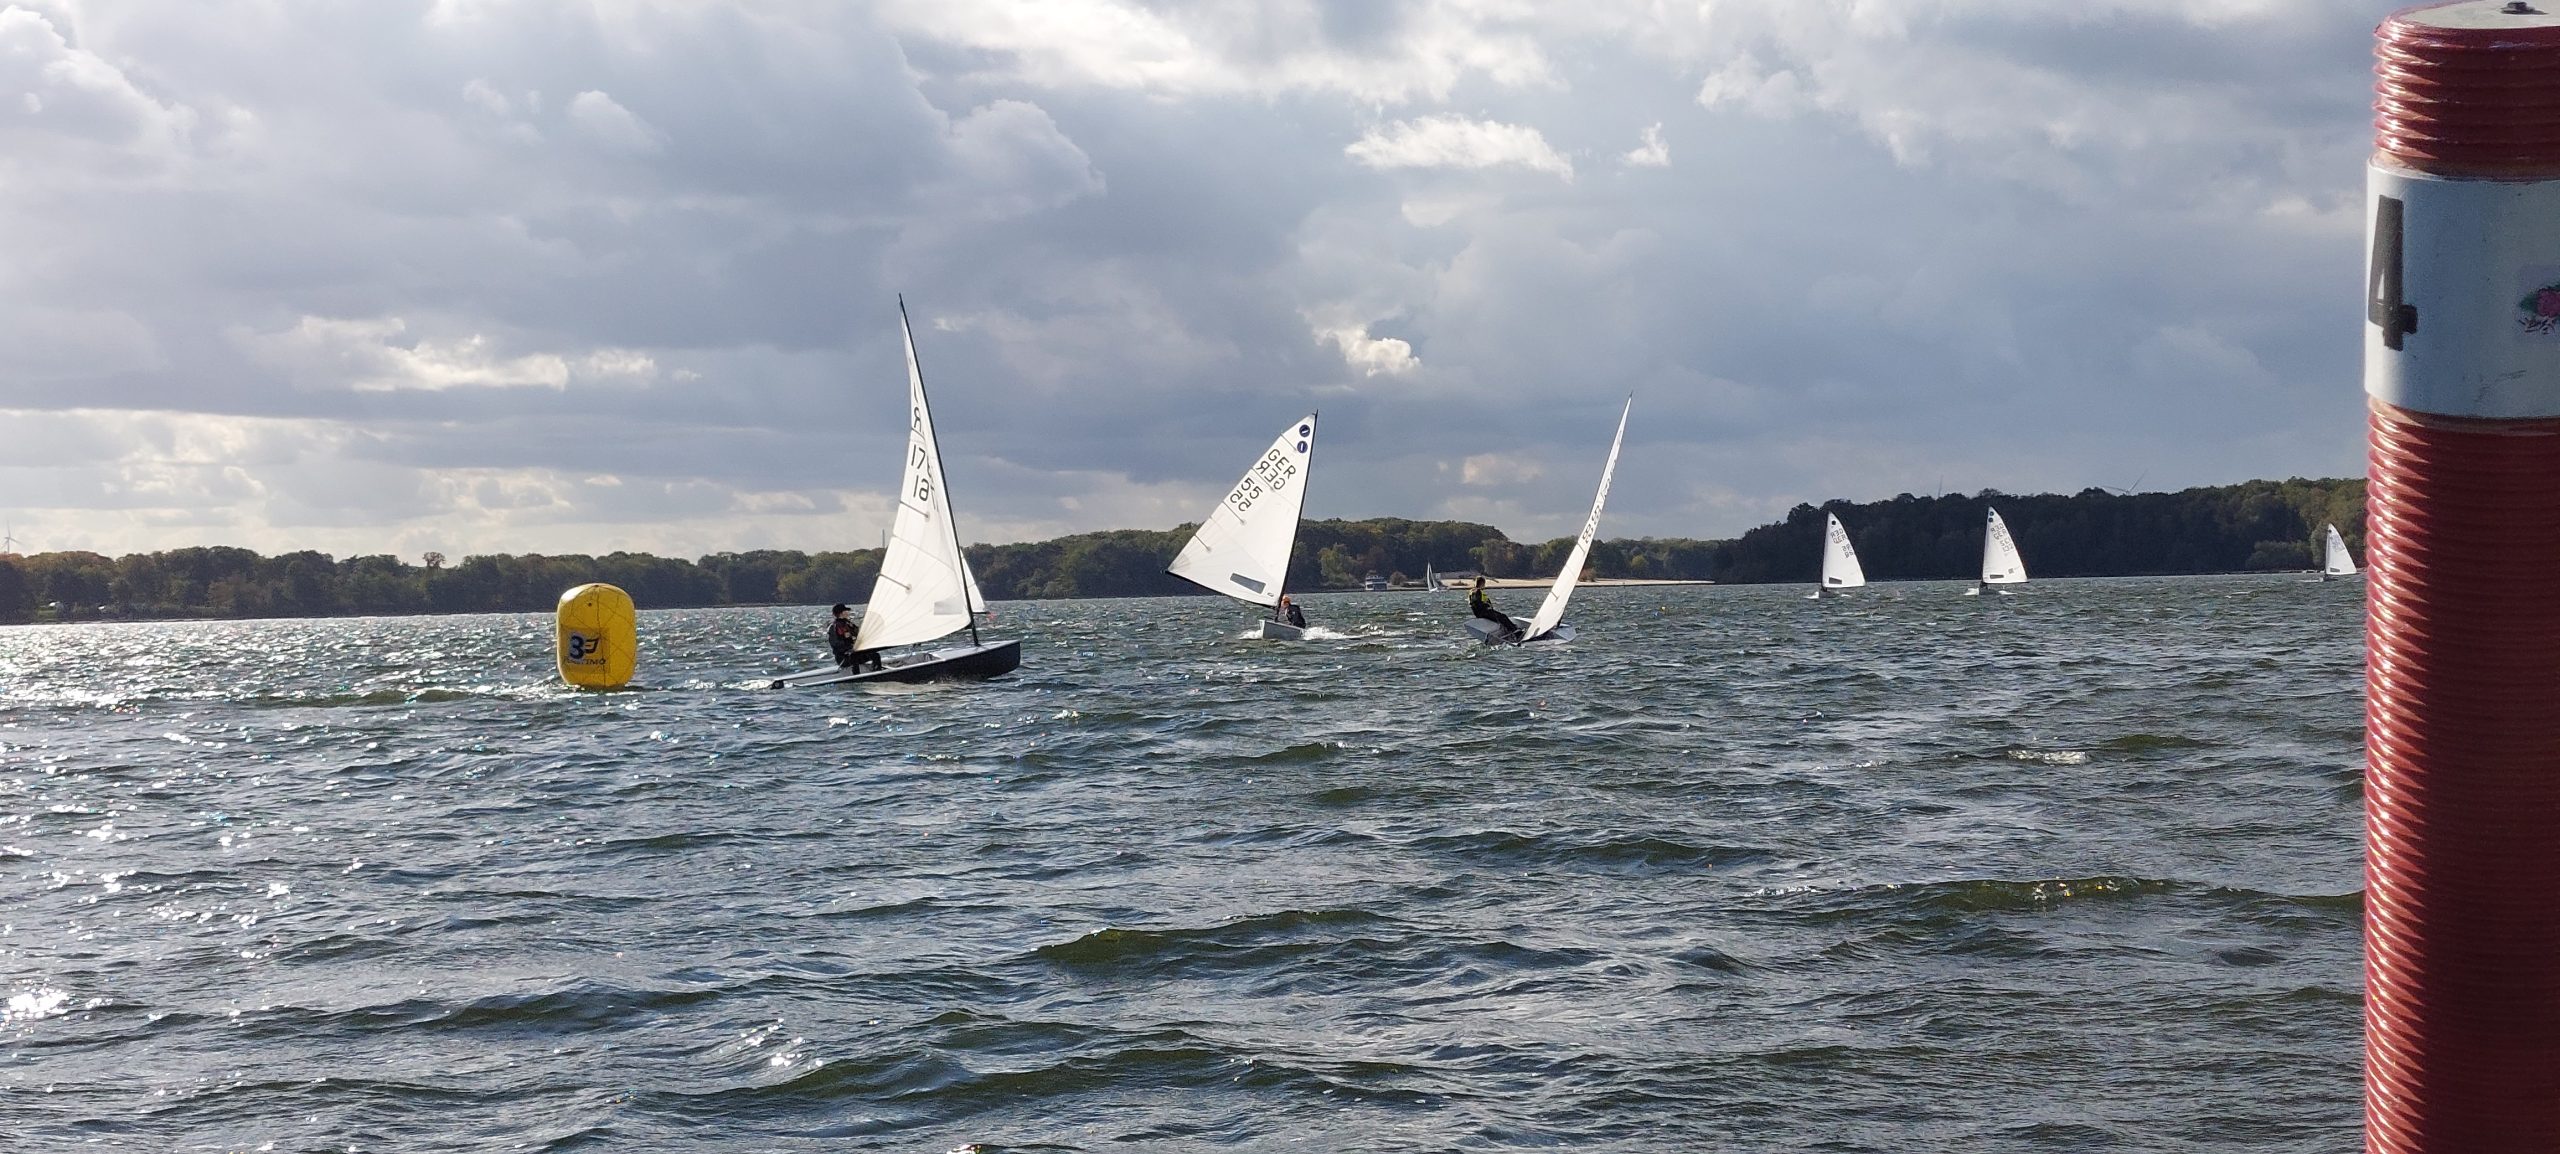 You are currently viewing Kehrausregatta 2022